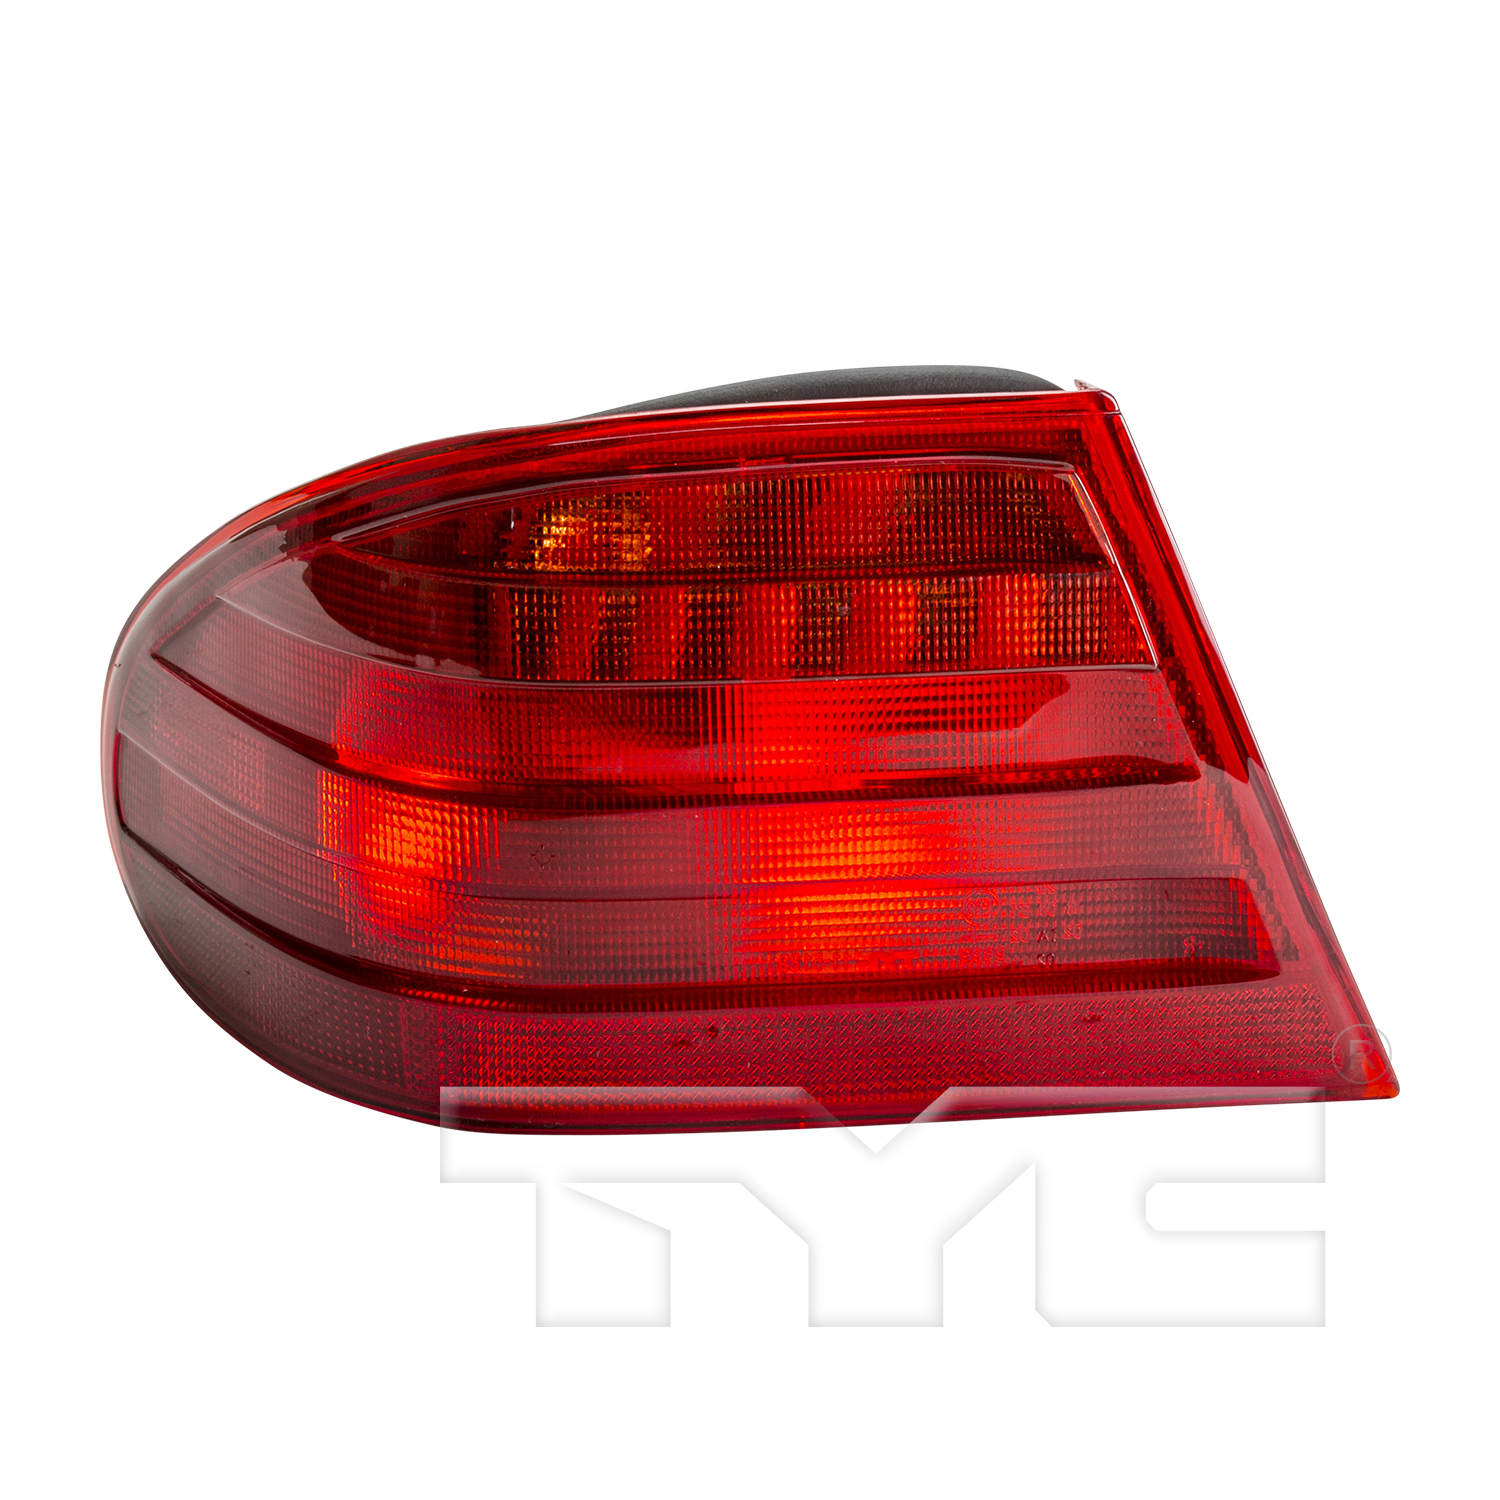 Aftermarket TAILLIGHTS for MERCEDES-BENZ - E430, E430,98-99,LT Taillamp assy outer